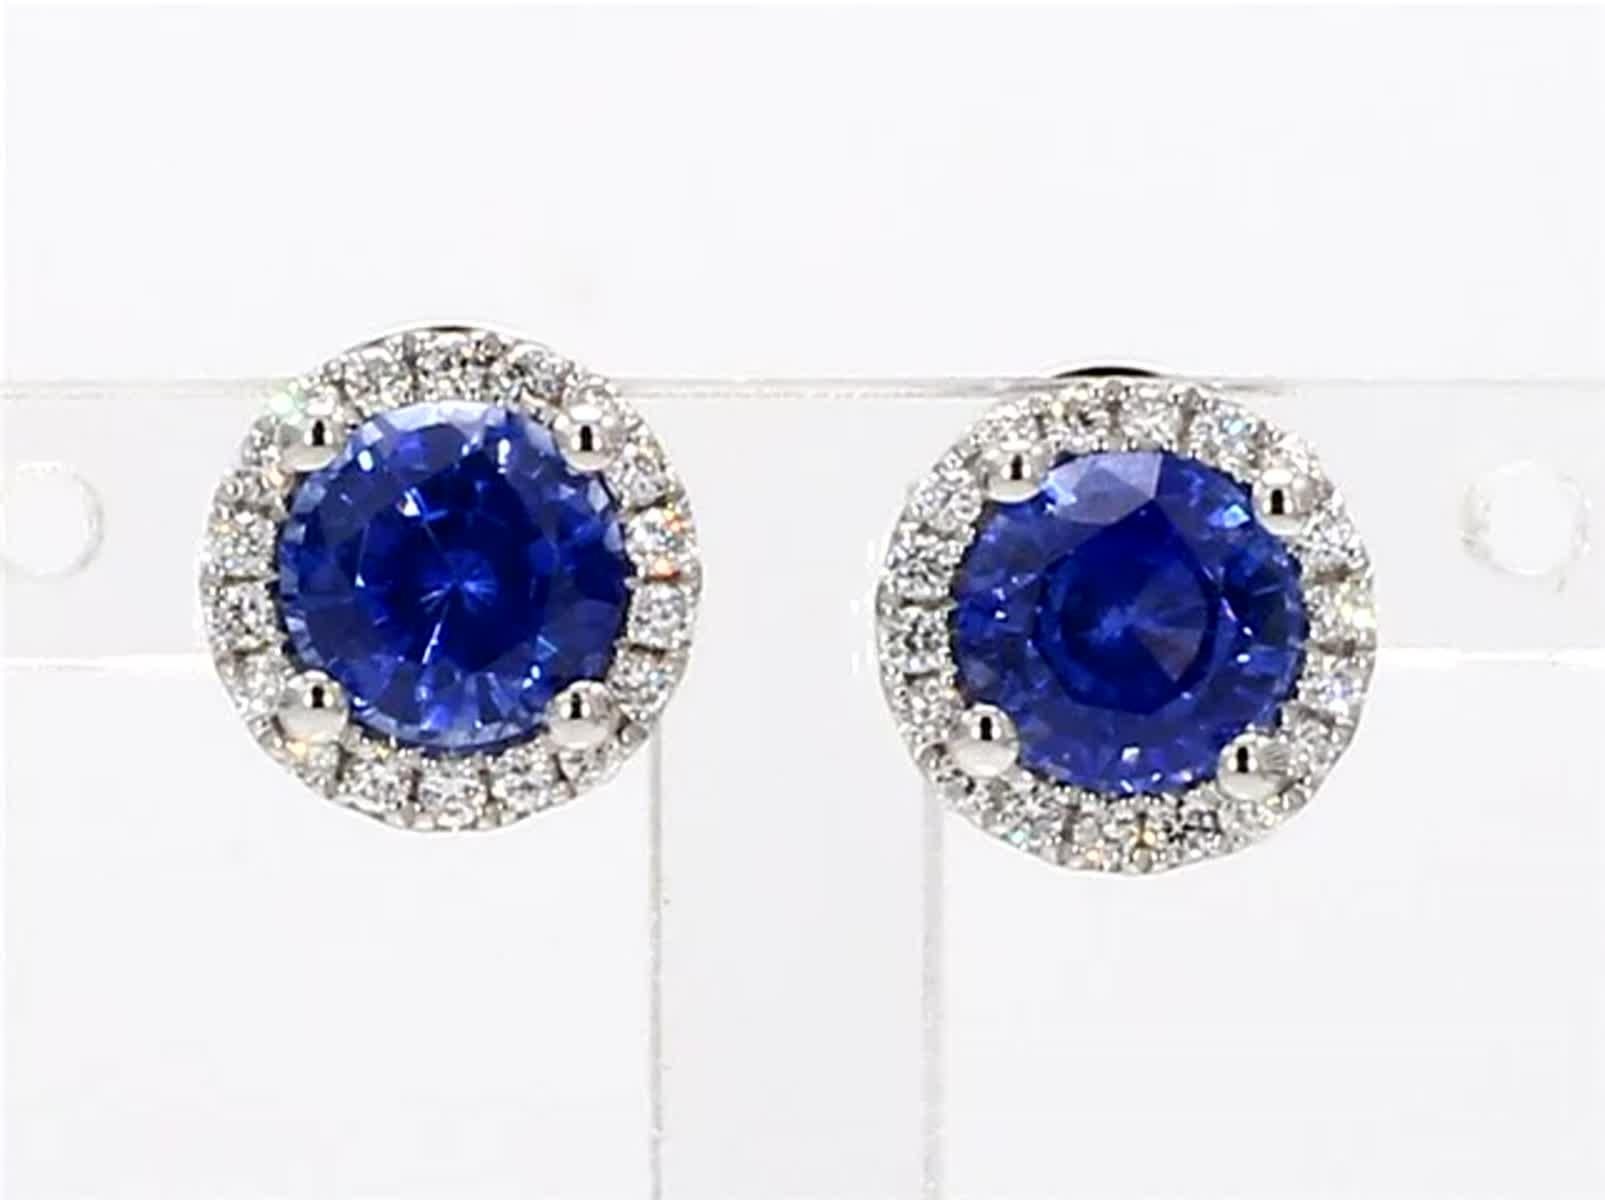 RareGemWorld's classic natural round cut sapphire earrings. Mounted in a beautiful 14K White Gold setting with natural round cut blue sapphires. The sapphires are surrounded by natural round white diamond melee in a beautiful single halo. These